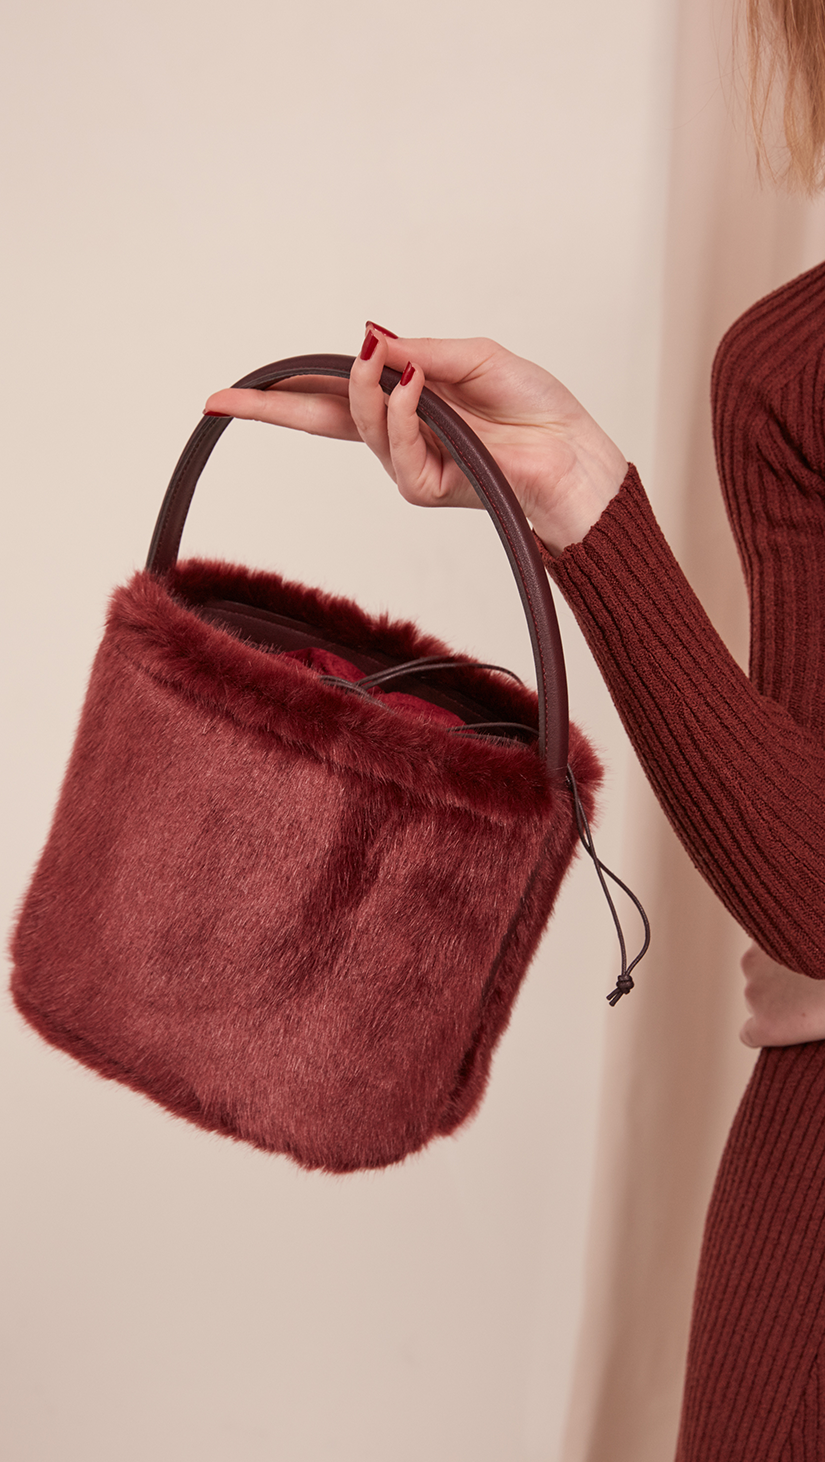 Seed Furry Bucket bag in Wine. Main compartment with adjustable strap, detachable shoulder strap, interior pocket with zipper compartment. Structured bottom.